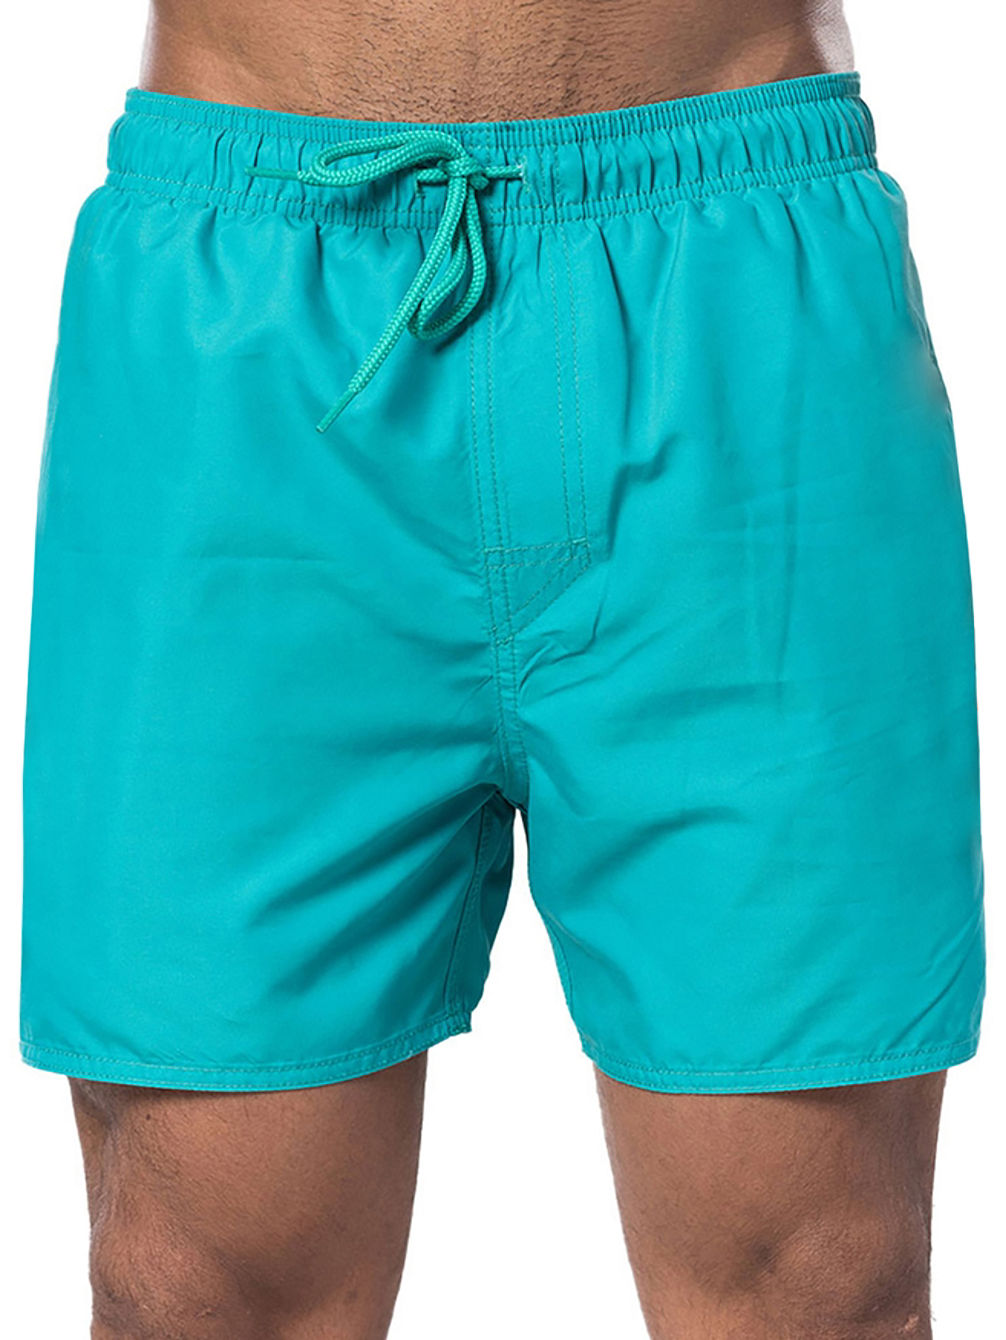 Offset Volley Boardshorts